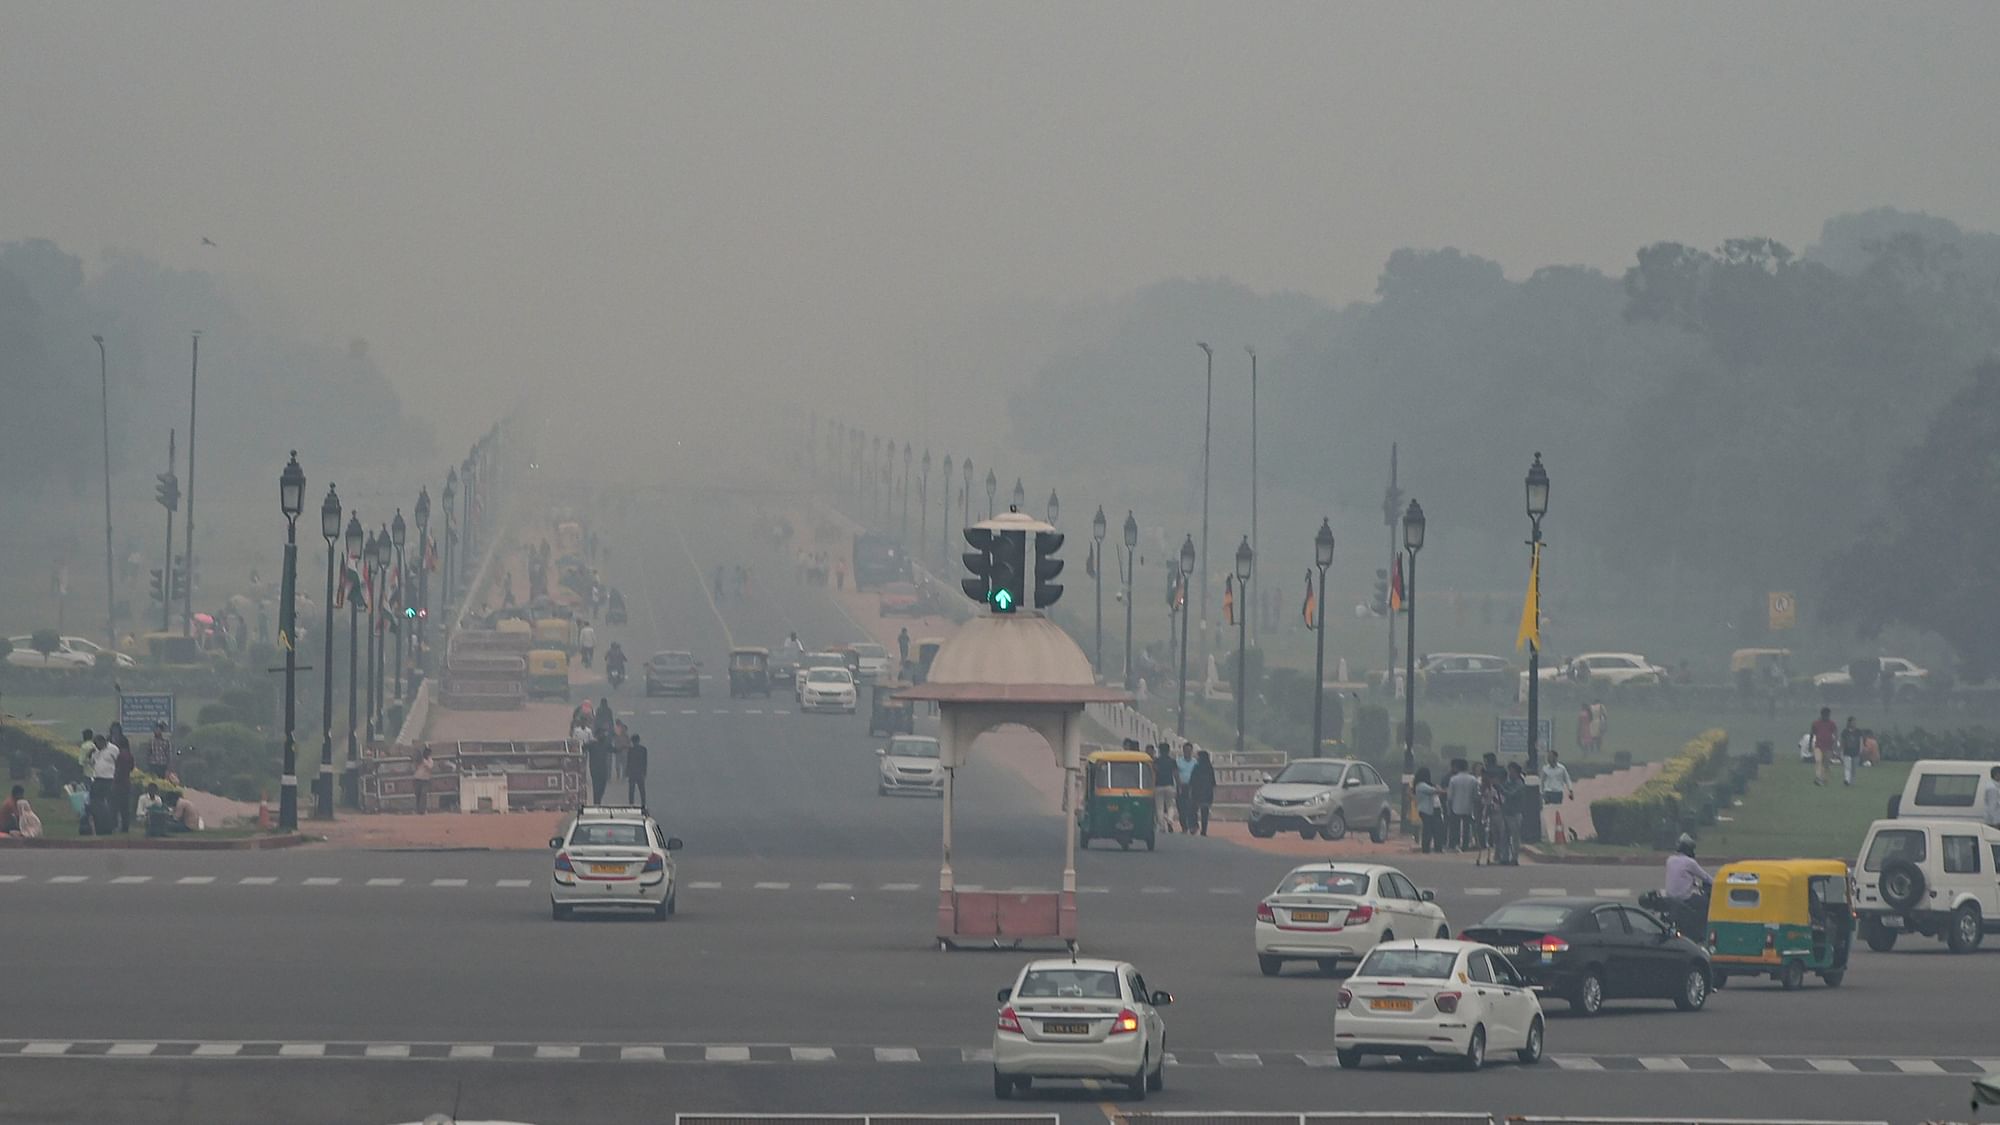 Kejriwal said the Delhi government is taking all steps to reduce pollution.